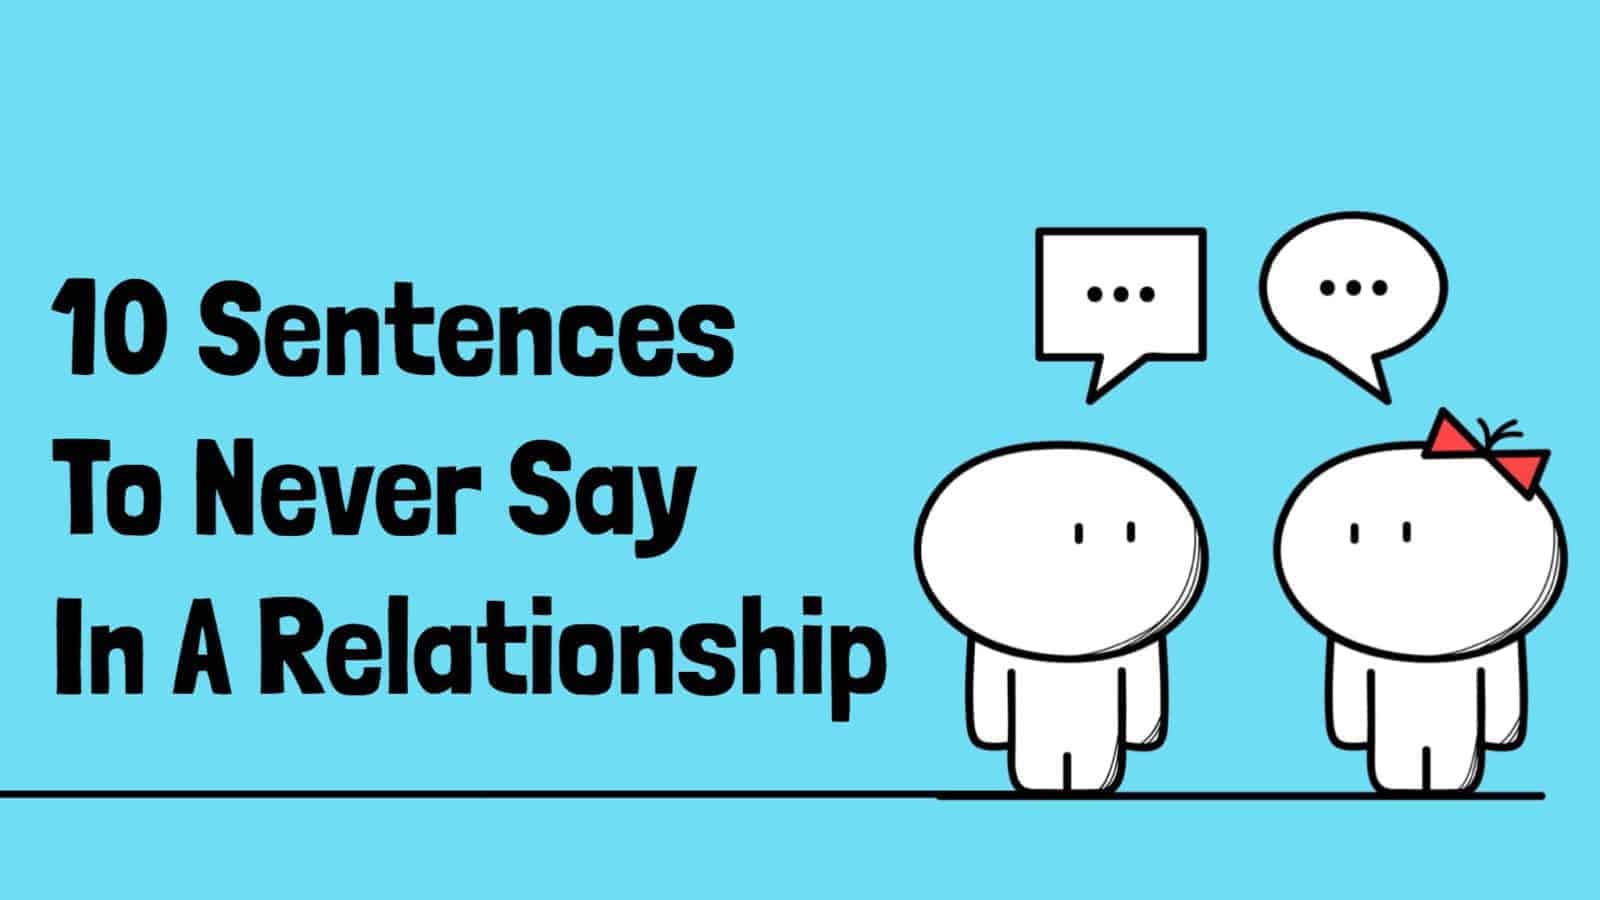 10 Sentences To Never Say In A Relationship